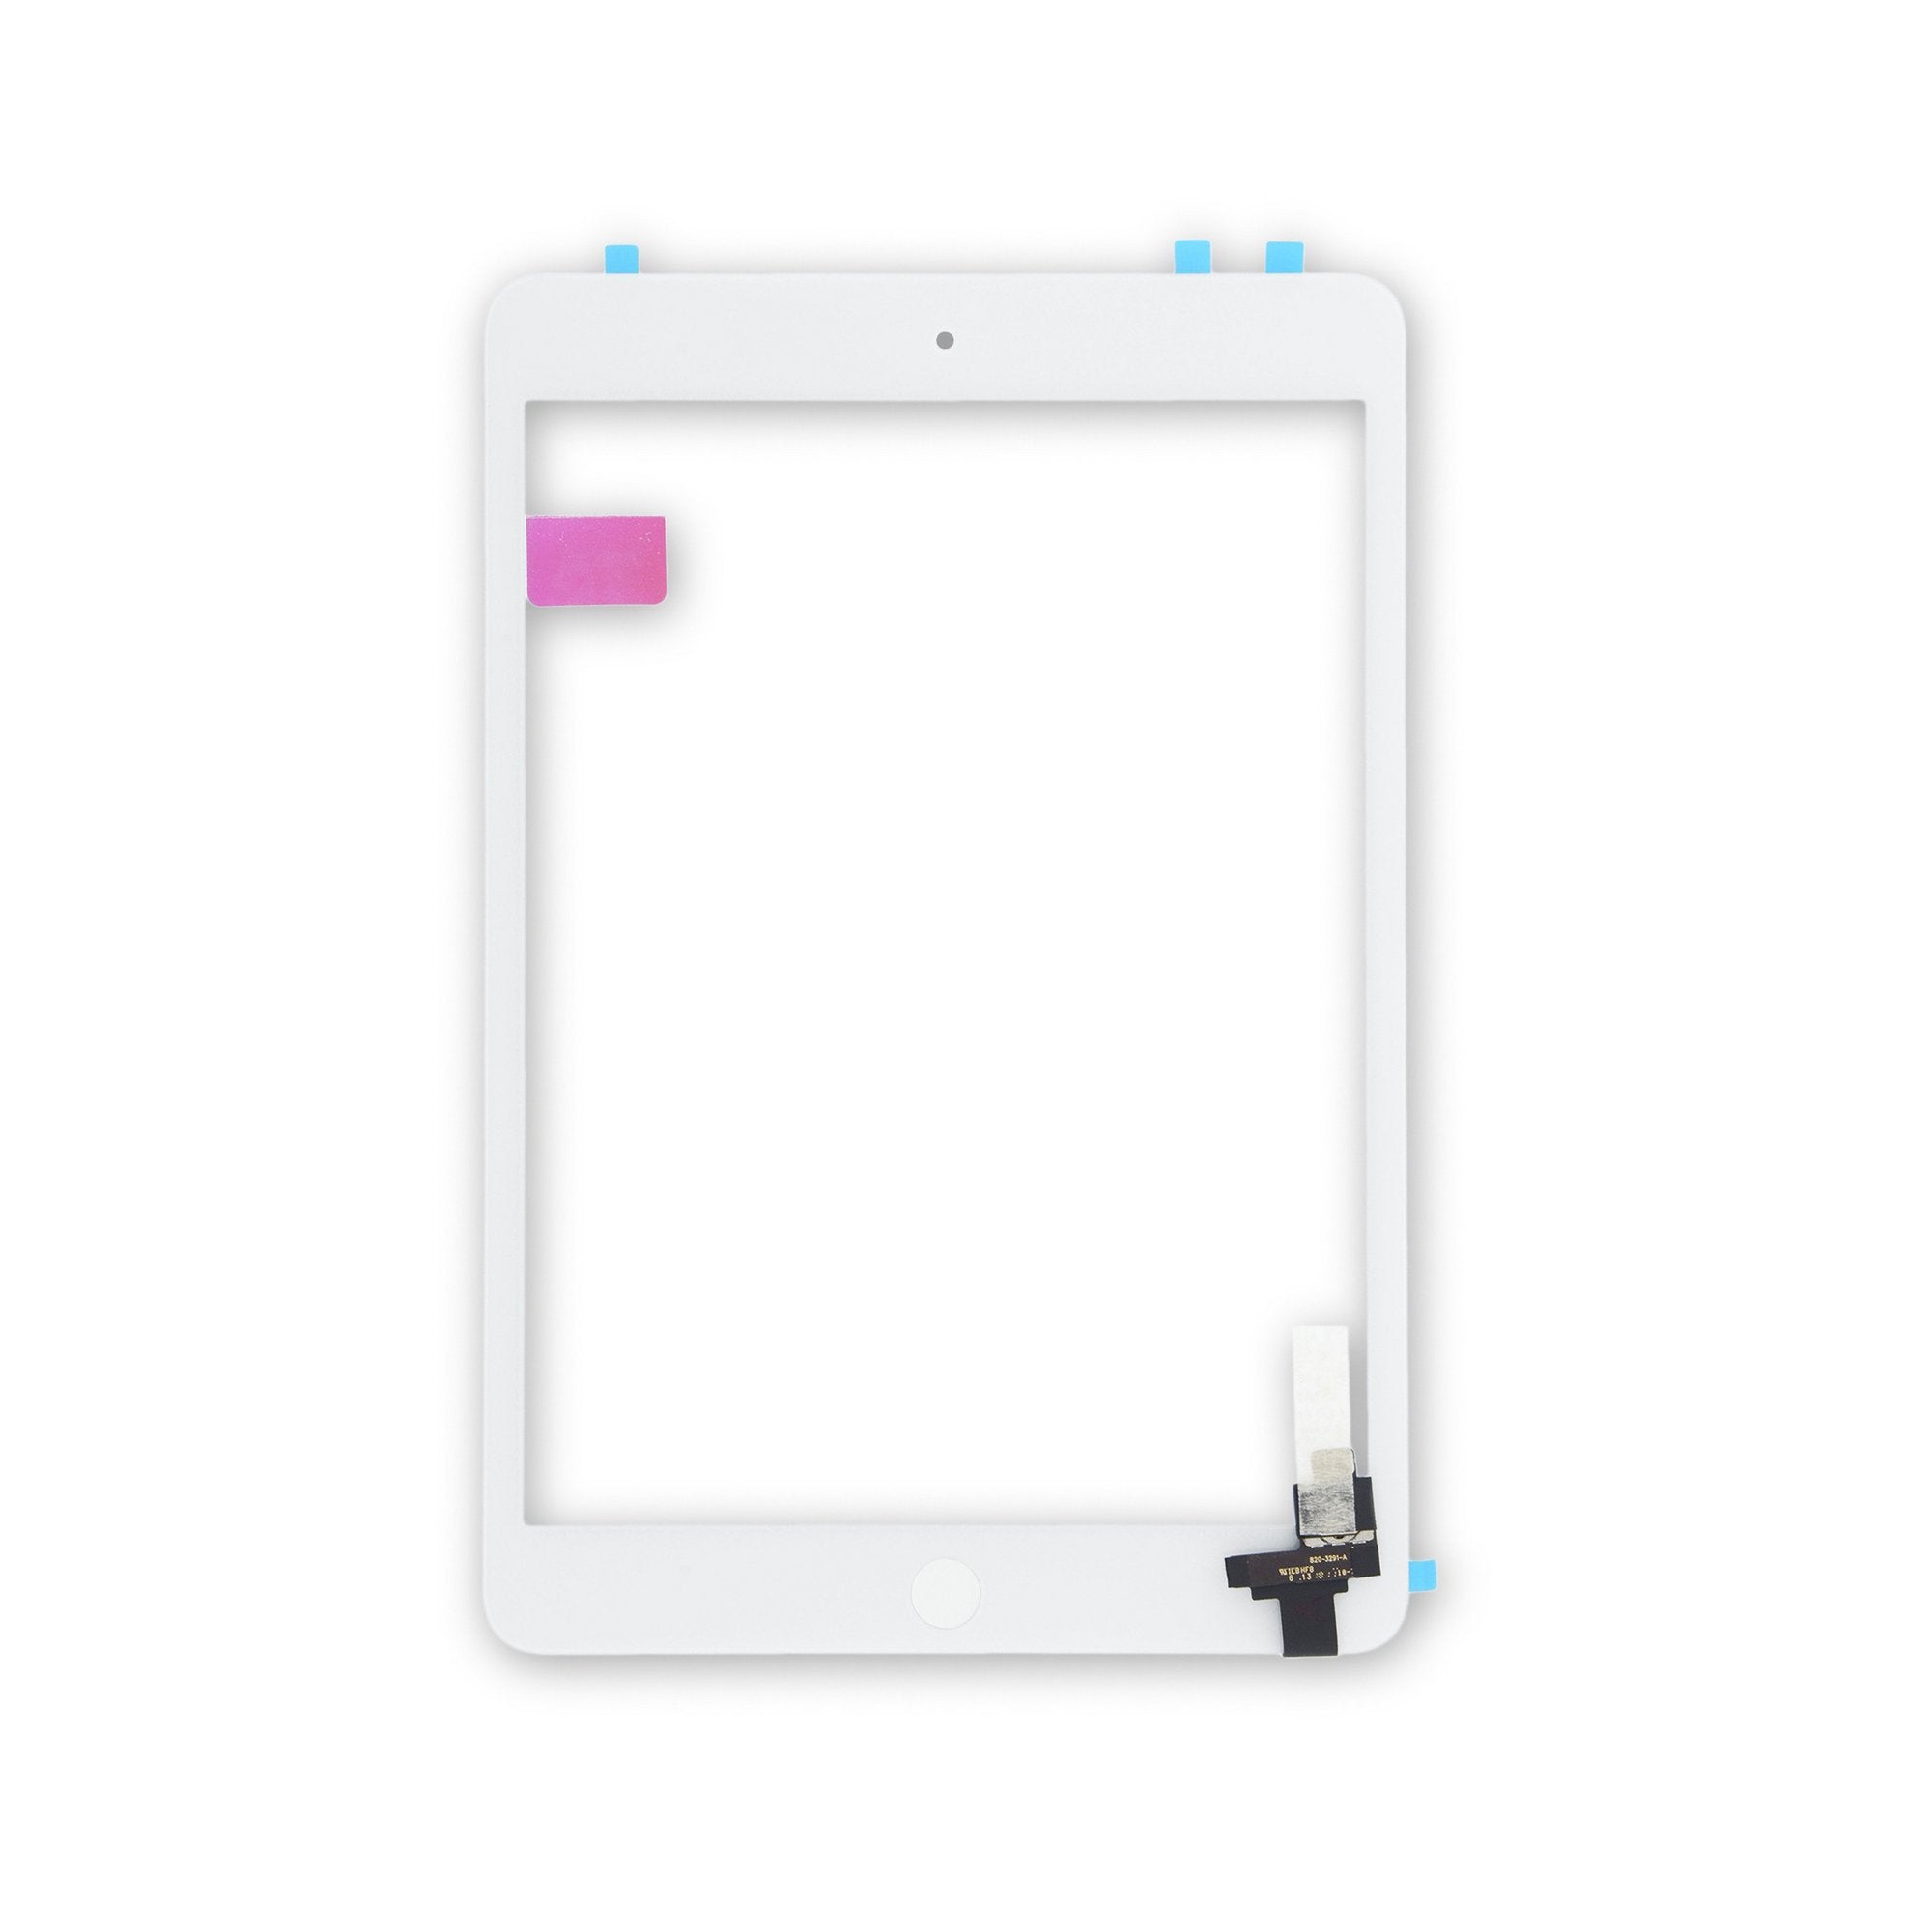 Touch Screen Digitizer with Home Button And IC Chip for iPad Mini & iPad  Mini 2 - White (Premium)